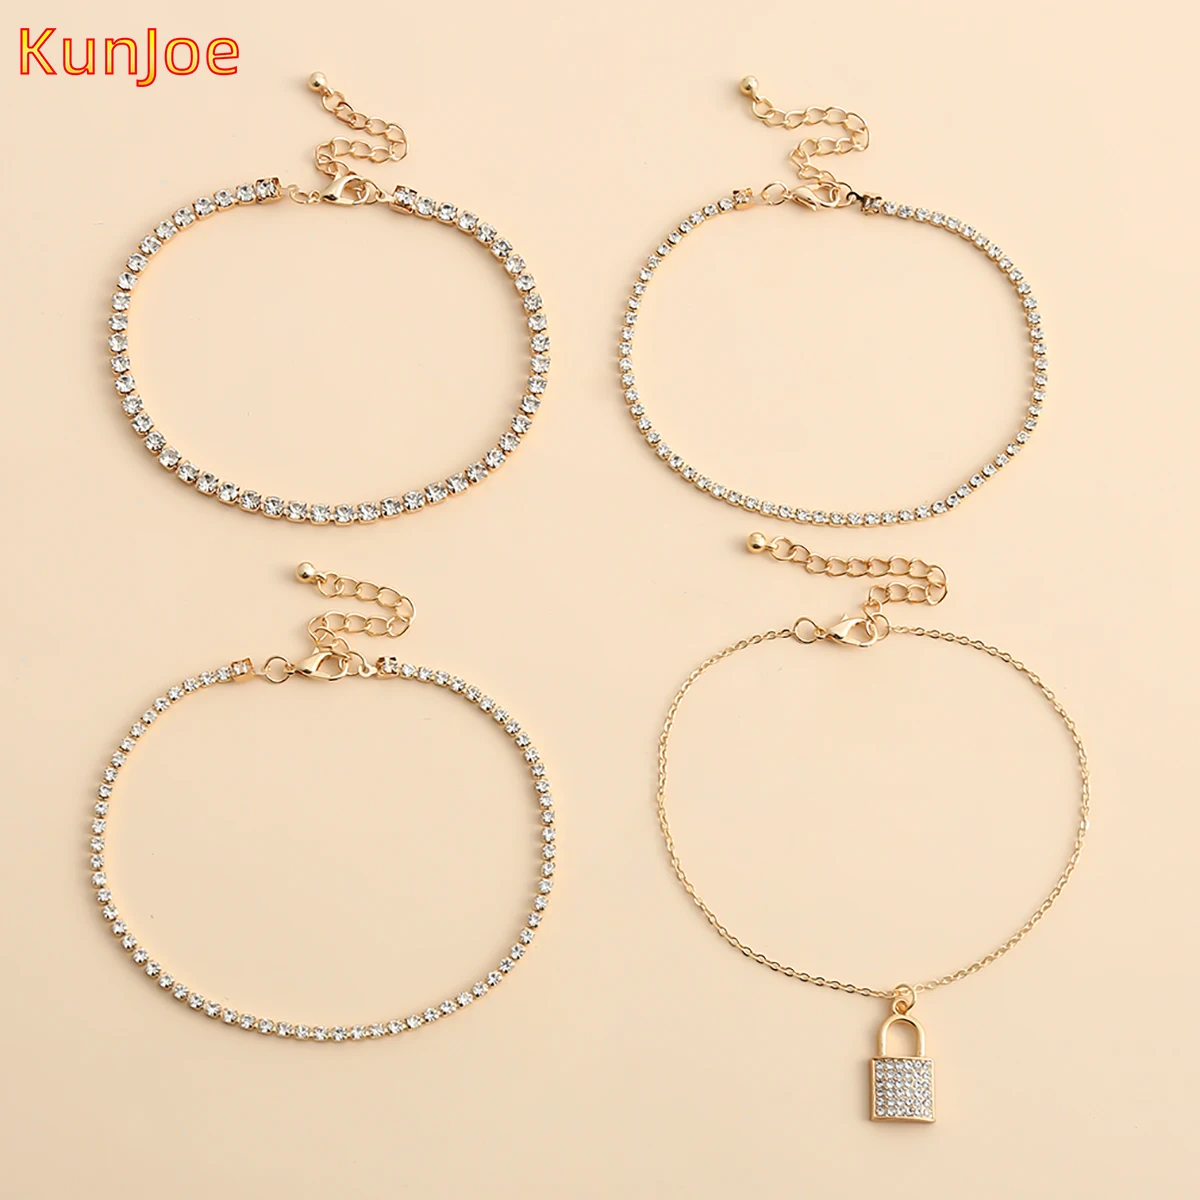 

KunJoe 2021 Summer New Women Lock Pendant Anklet Iced Out Bling Miami Cuban Link Anklets Couples Padlock Chain Hip Hop Jewelry